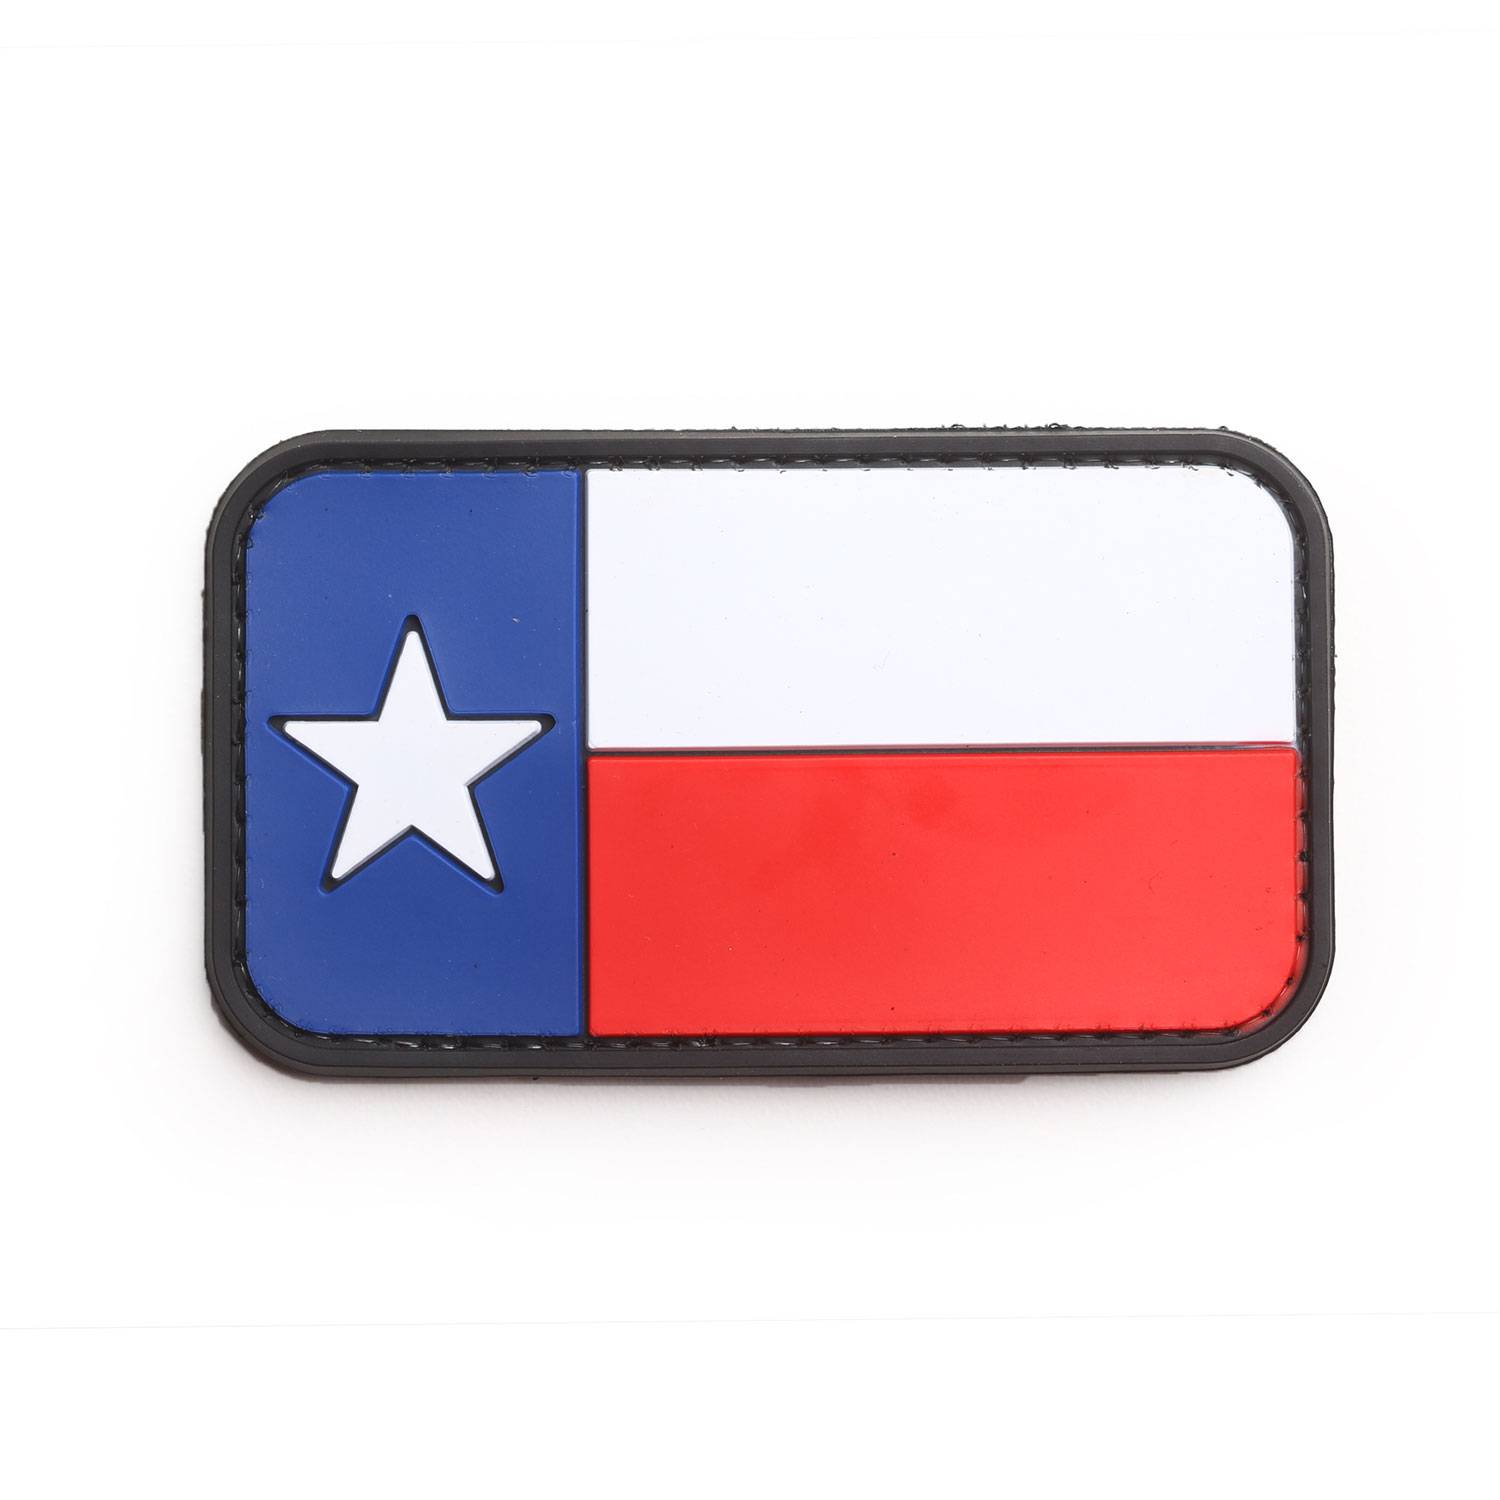 5ive Star Gear “Texas Flag” Morale Patch